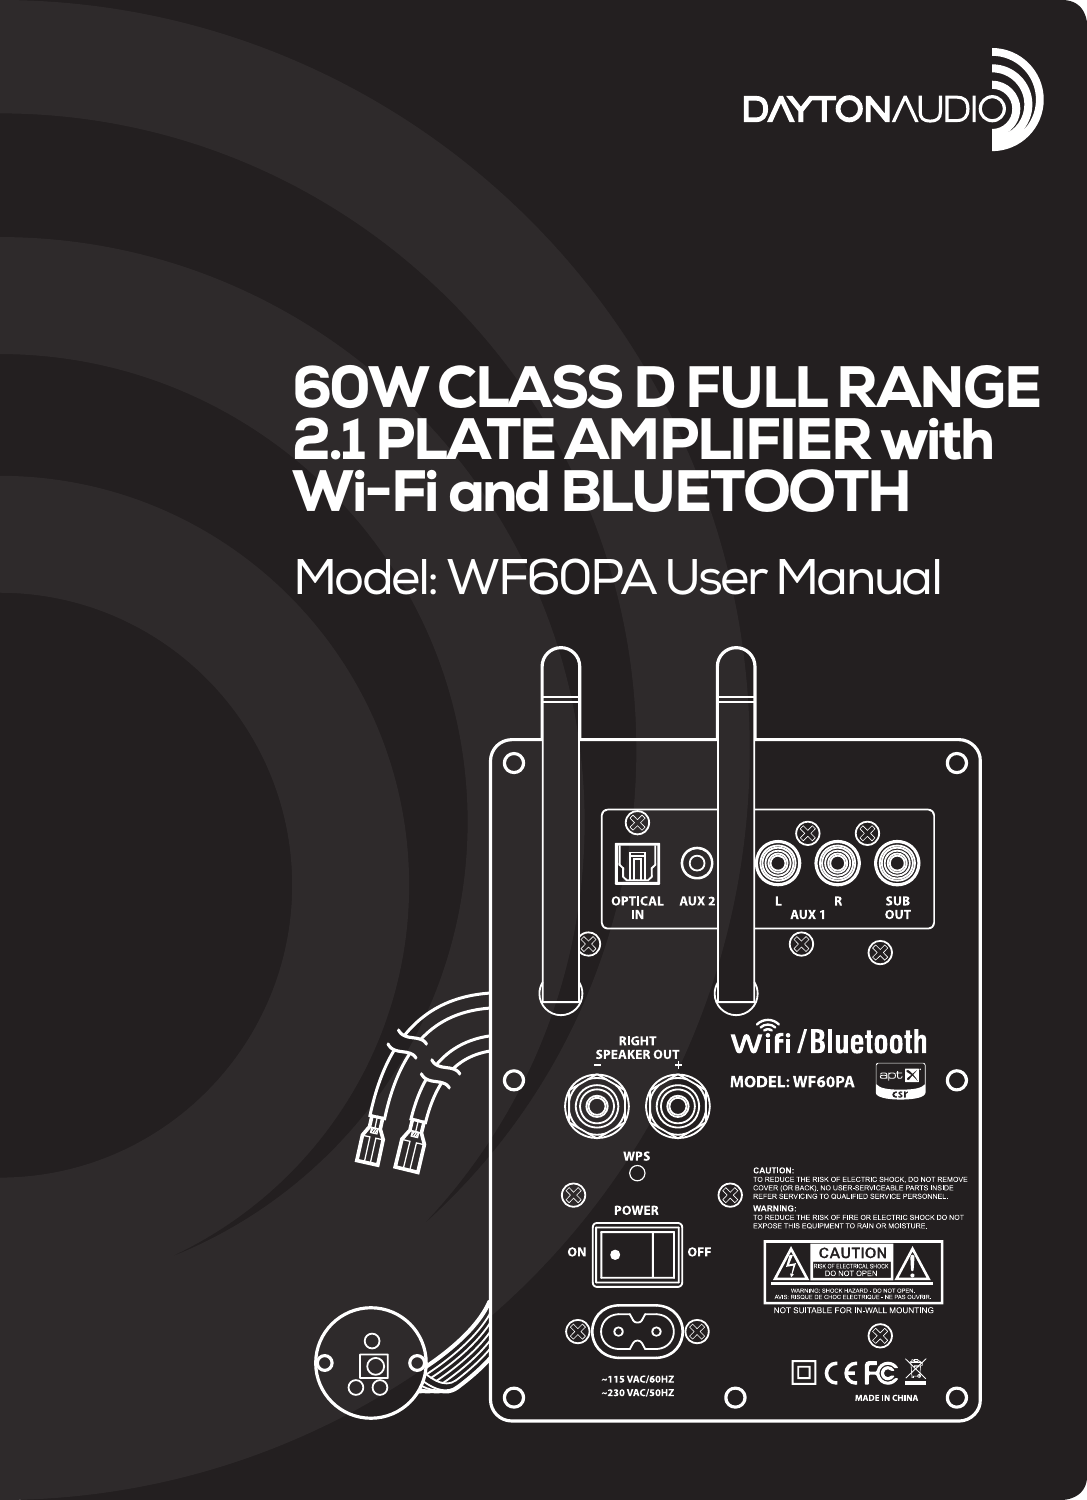 Model: WF60PA User Manual60W CLASS D FULL RANGE 2.1 PLATE AMPLIFIER with Wi-Fi and BLUETOOTH